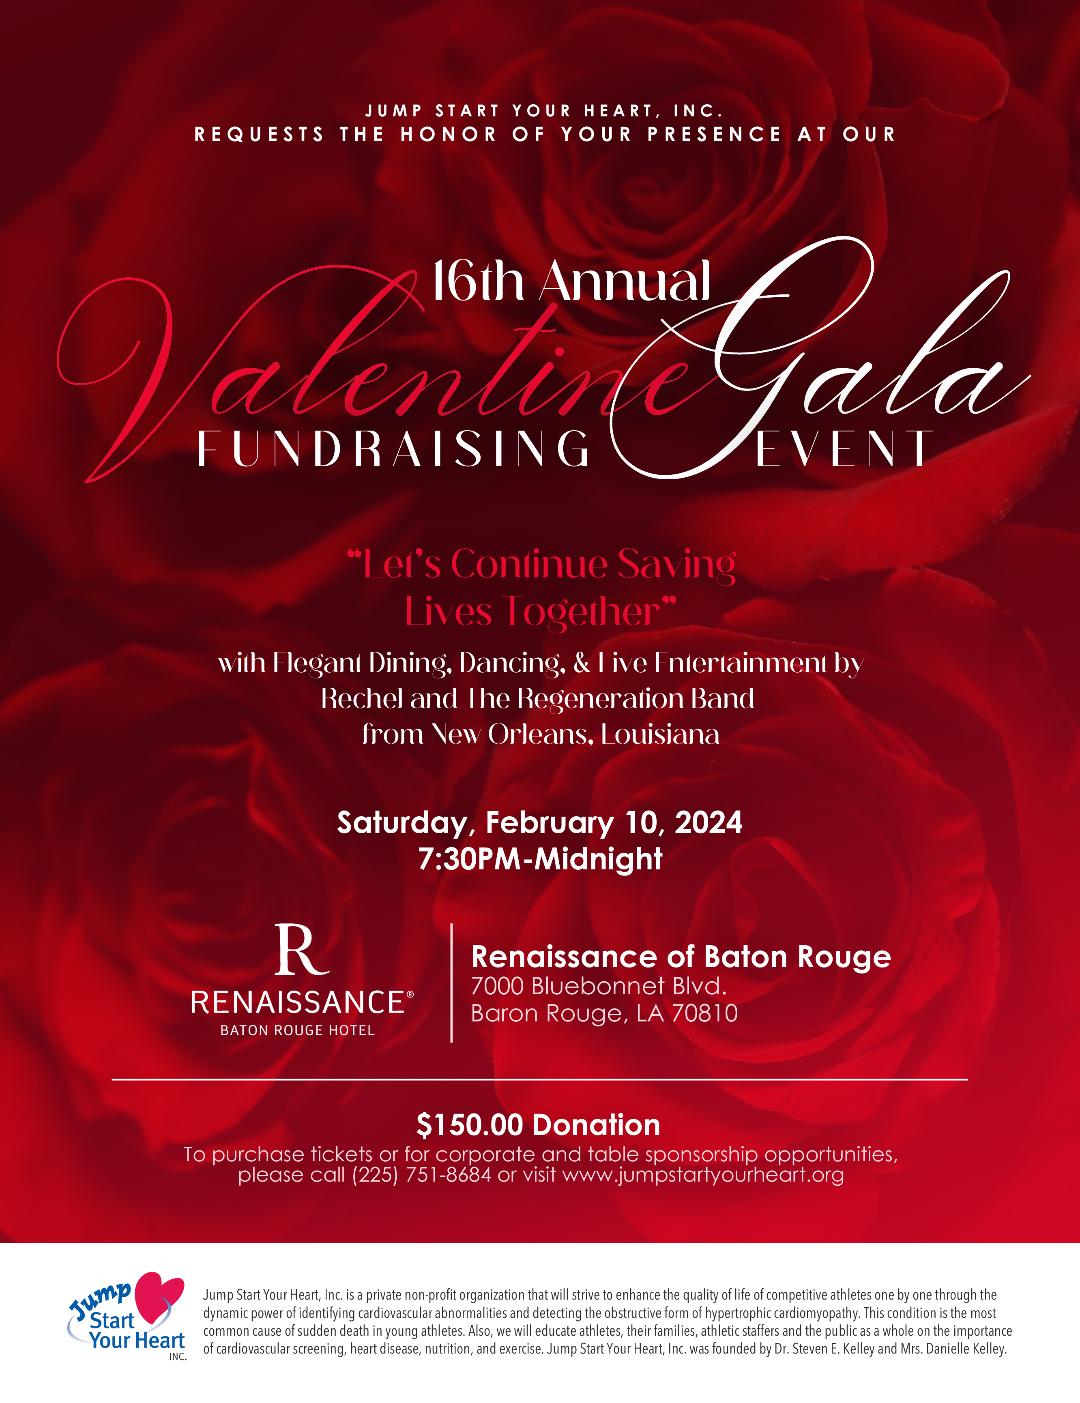 A flyer for the valentine gala fundraising event.